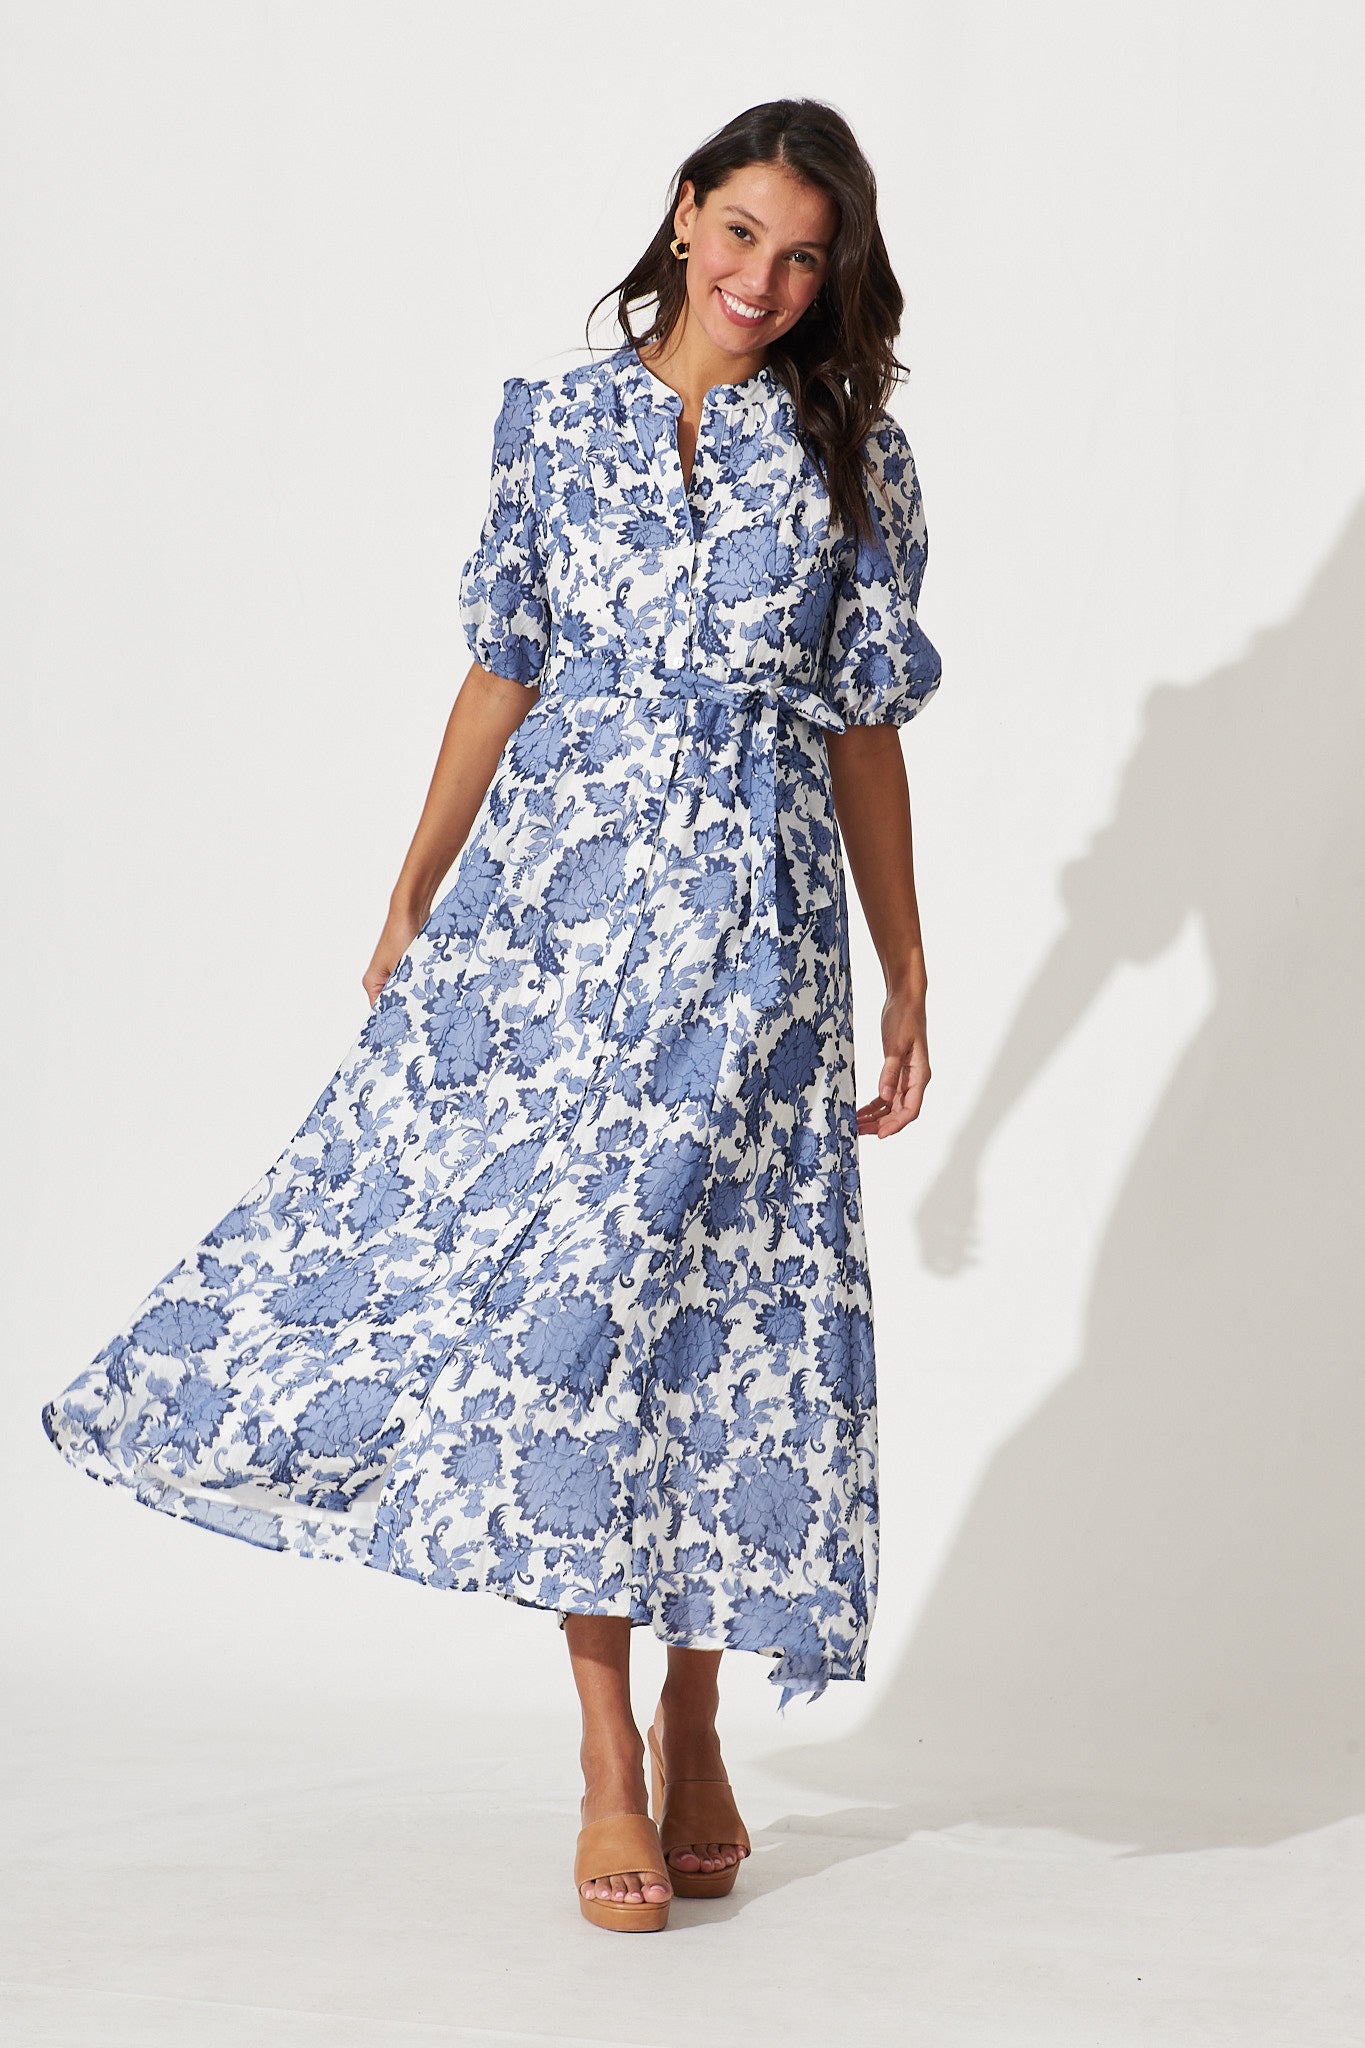 Loriet Maxi Shirt Dress In Blue With White Floral Cotton Blend